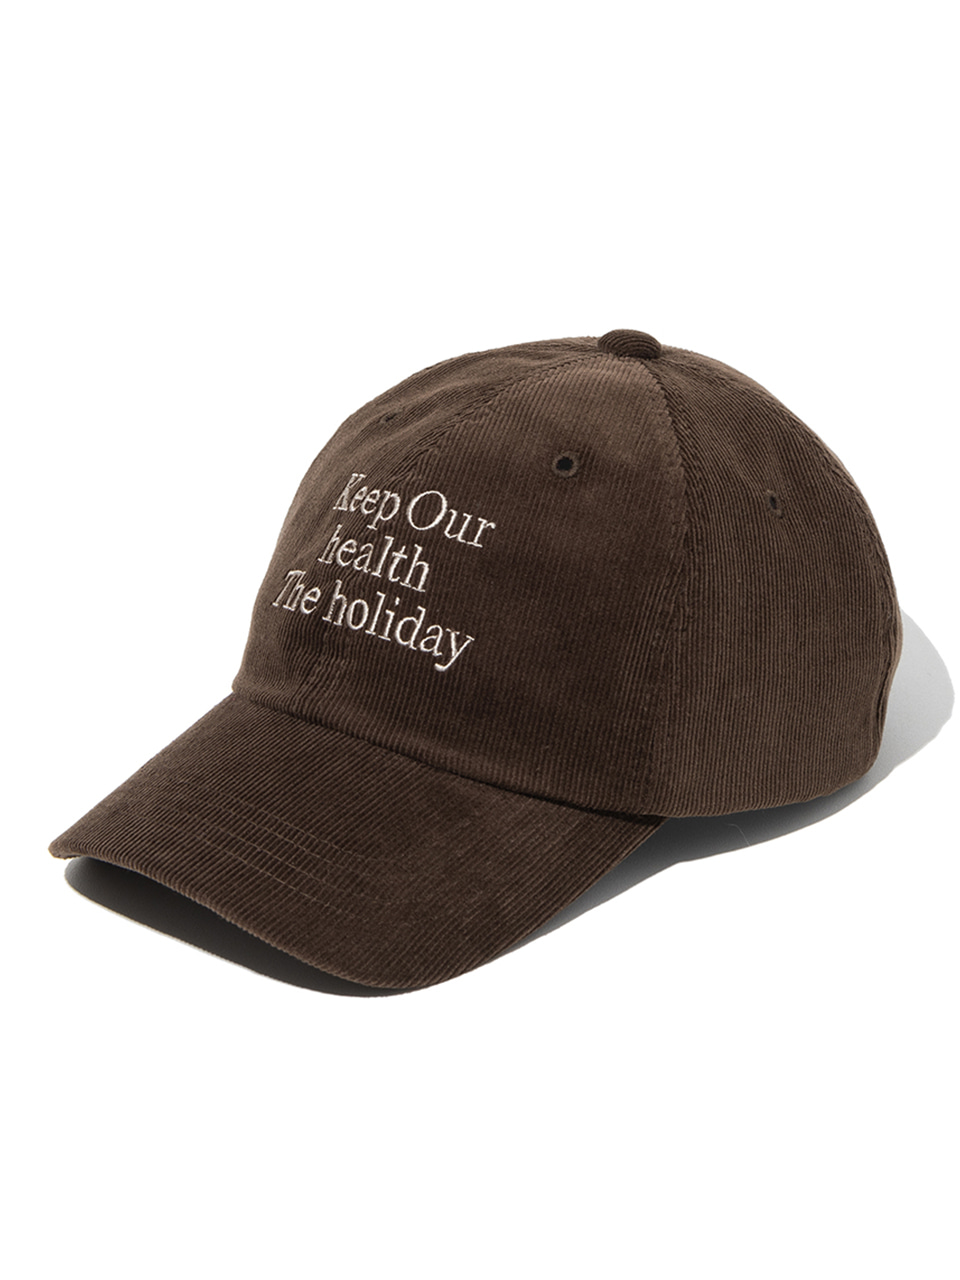 Millo Archive Holiday Corduroy Ball Cap [Brown]